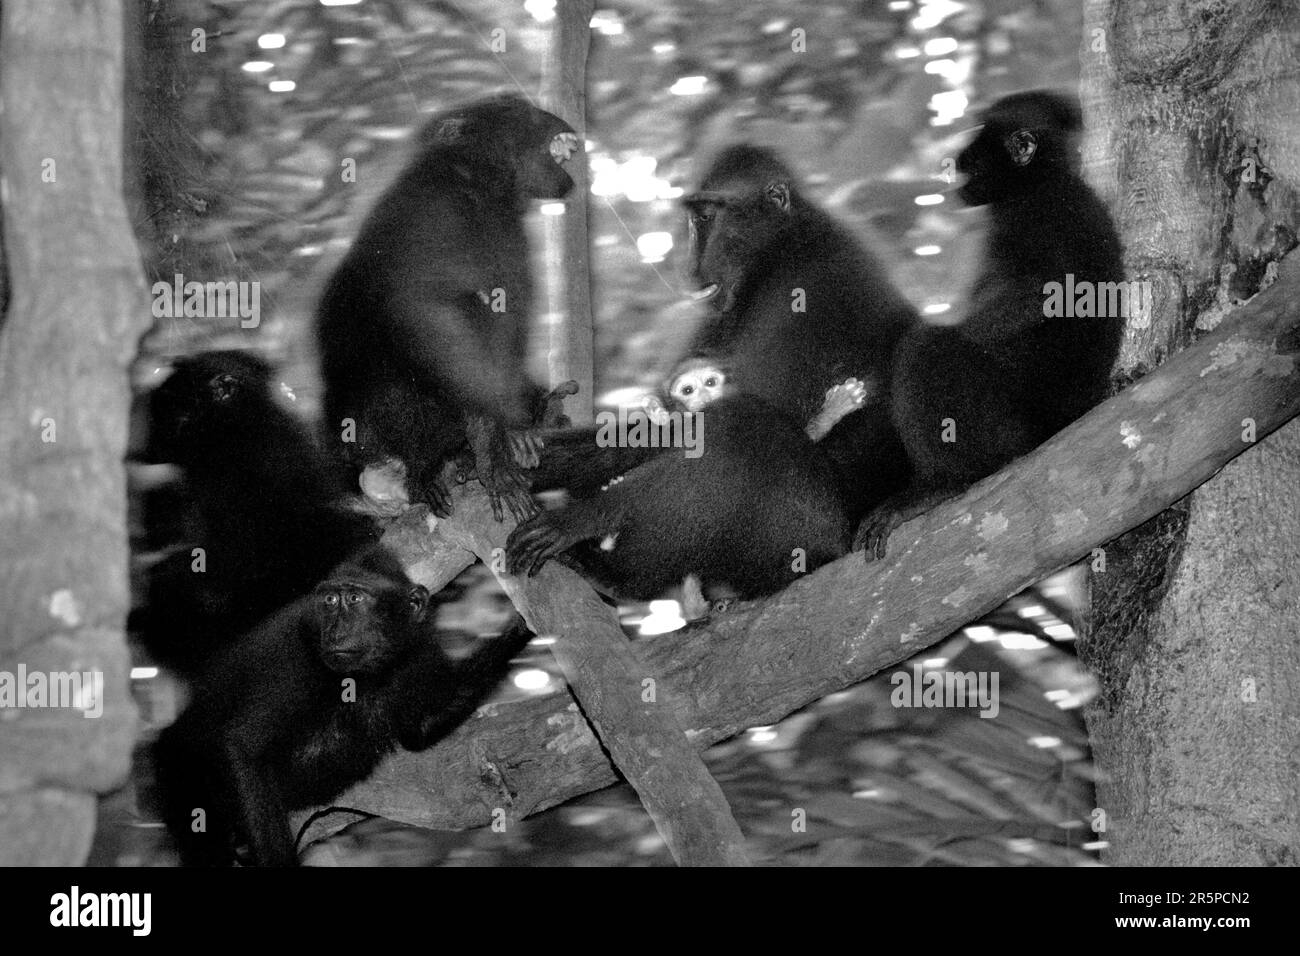 A troop of Sulawesi black-crested macaque (Macaca nigra) is having social activity in Tangkoko Nature Reserve, North Sulawesi, Indonesia. Climate change and disease are emerging threats to primates, and approximately one-quarter of primates’ ranges have temperatures over historical ones, according to a team of scientists led by Miriam Plaza Pinto (Departamento de Ecologia, Centro de Biociências, Universidade Federal do Rio Grande do Norte, Natal, RN, Brazil) in their scientific report published on Nature in January 2023. Stock Photo